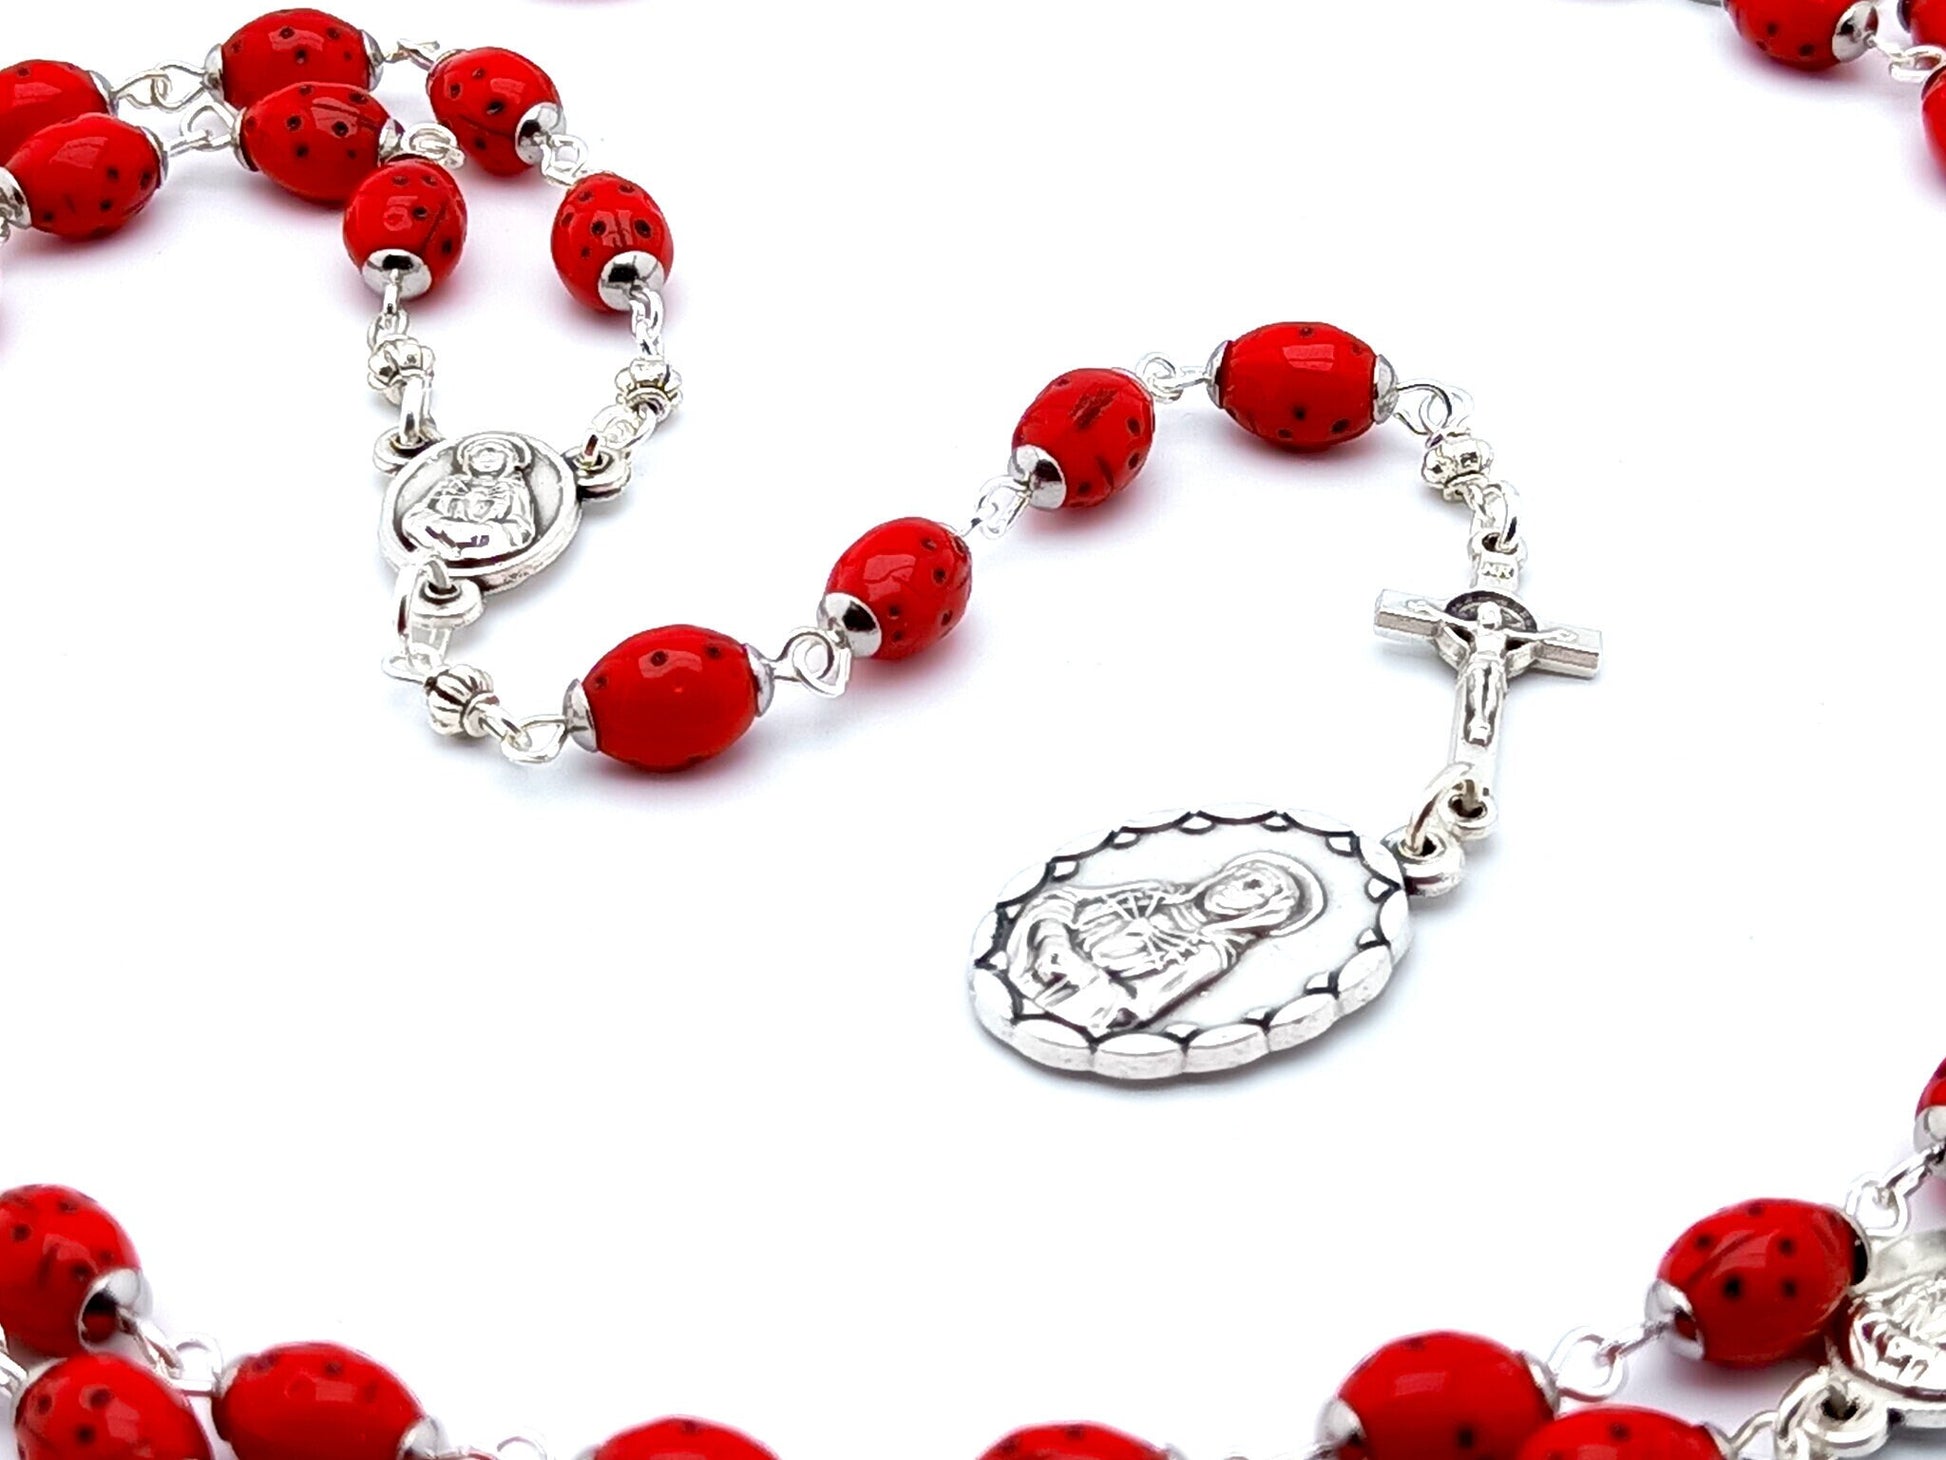 Our Lady of Sorrows unique rosary beads dolor rosary with red lady bug beads, silver Saint Benedict crucifix and medals.